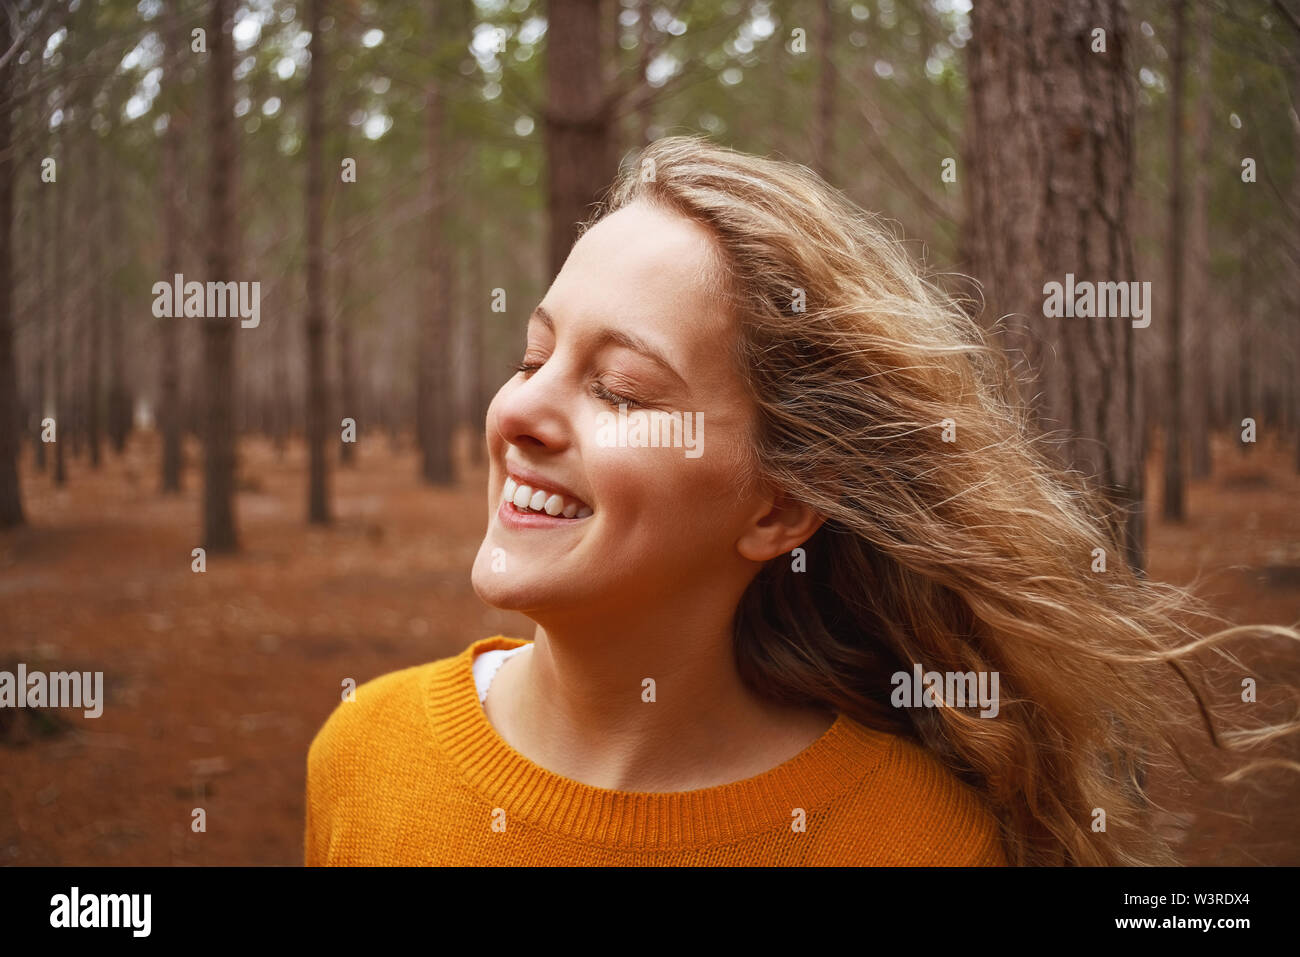 Smiling young woman enjoying the fresh air in the forest Stock Photo